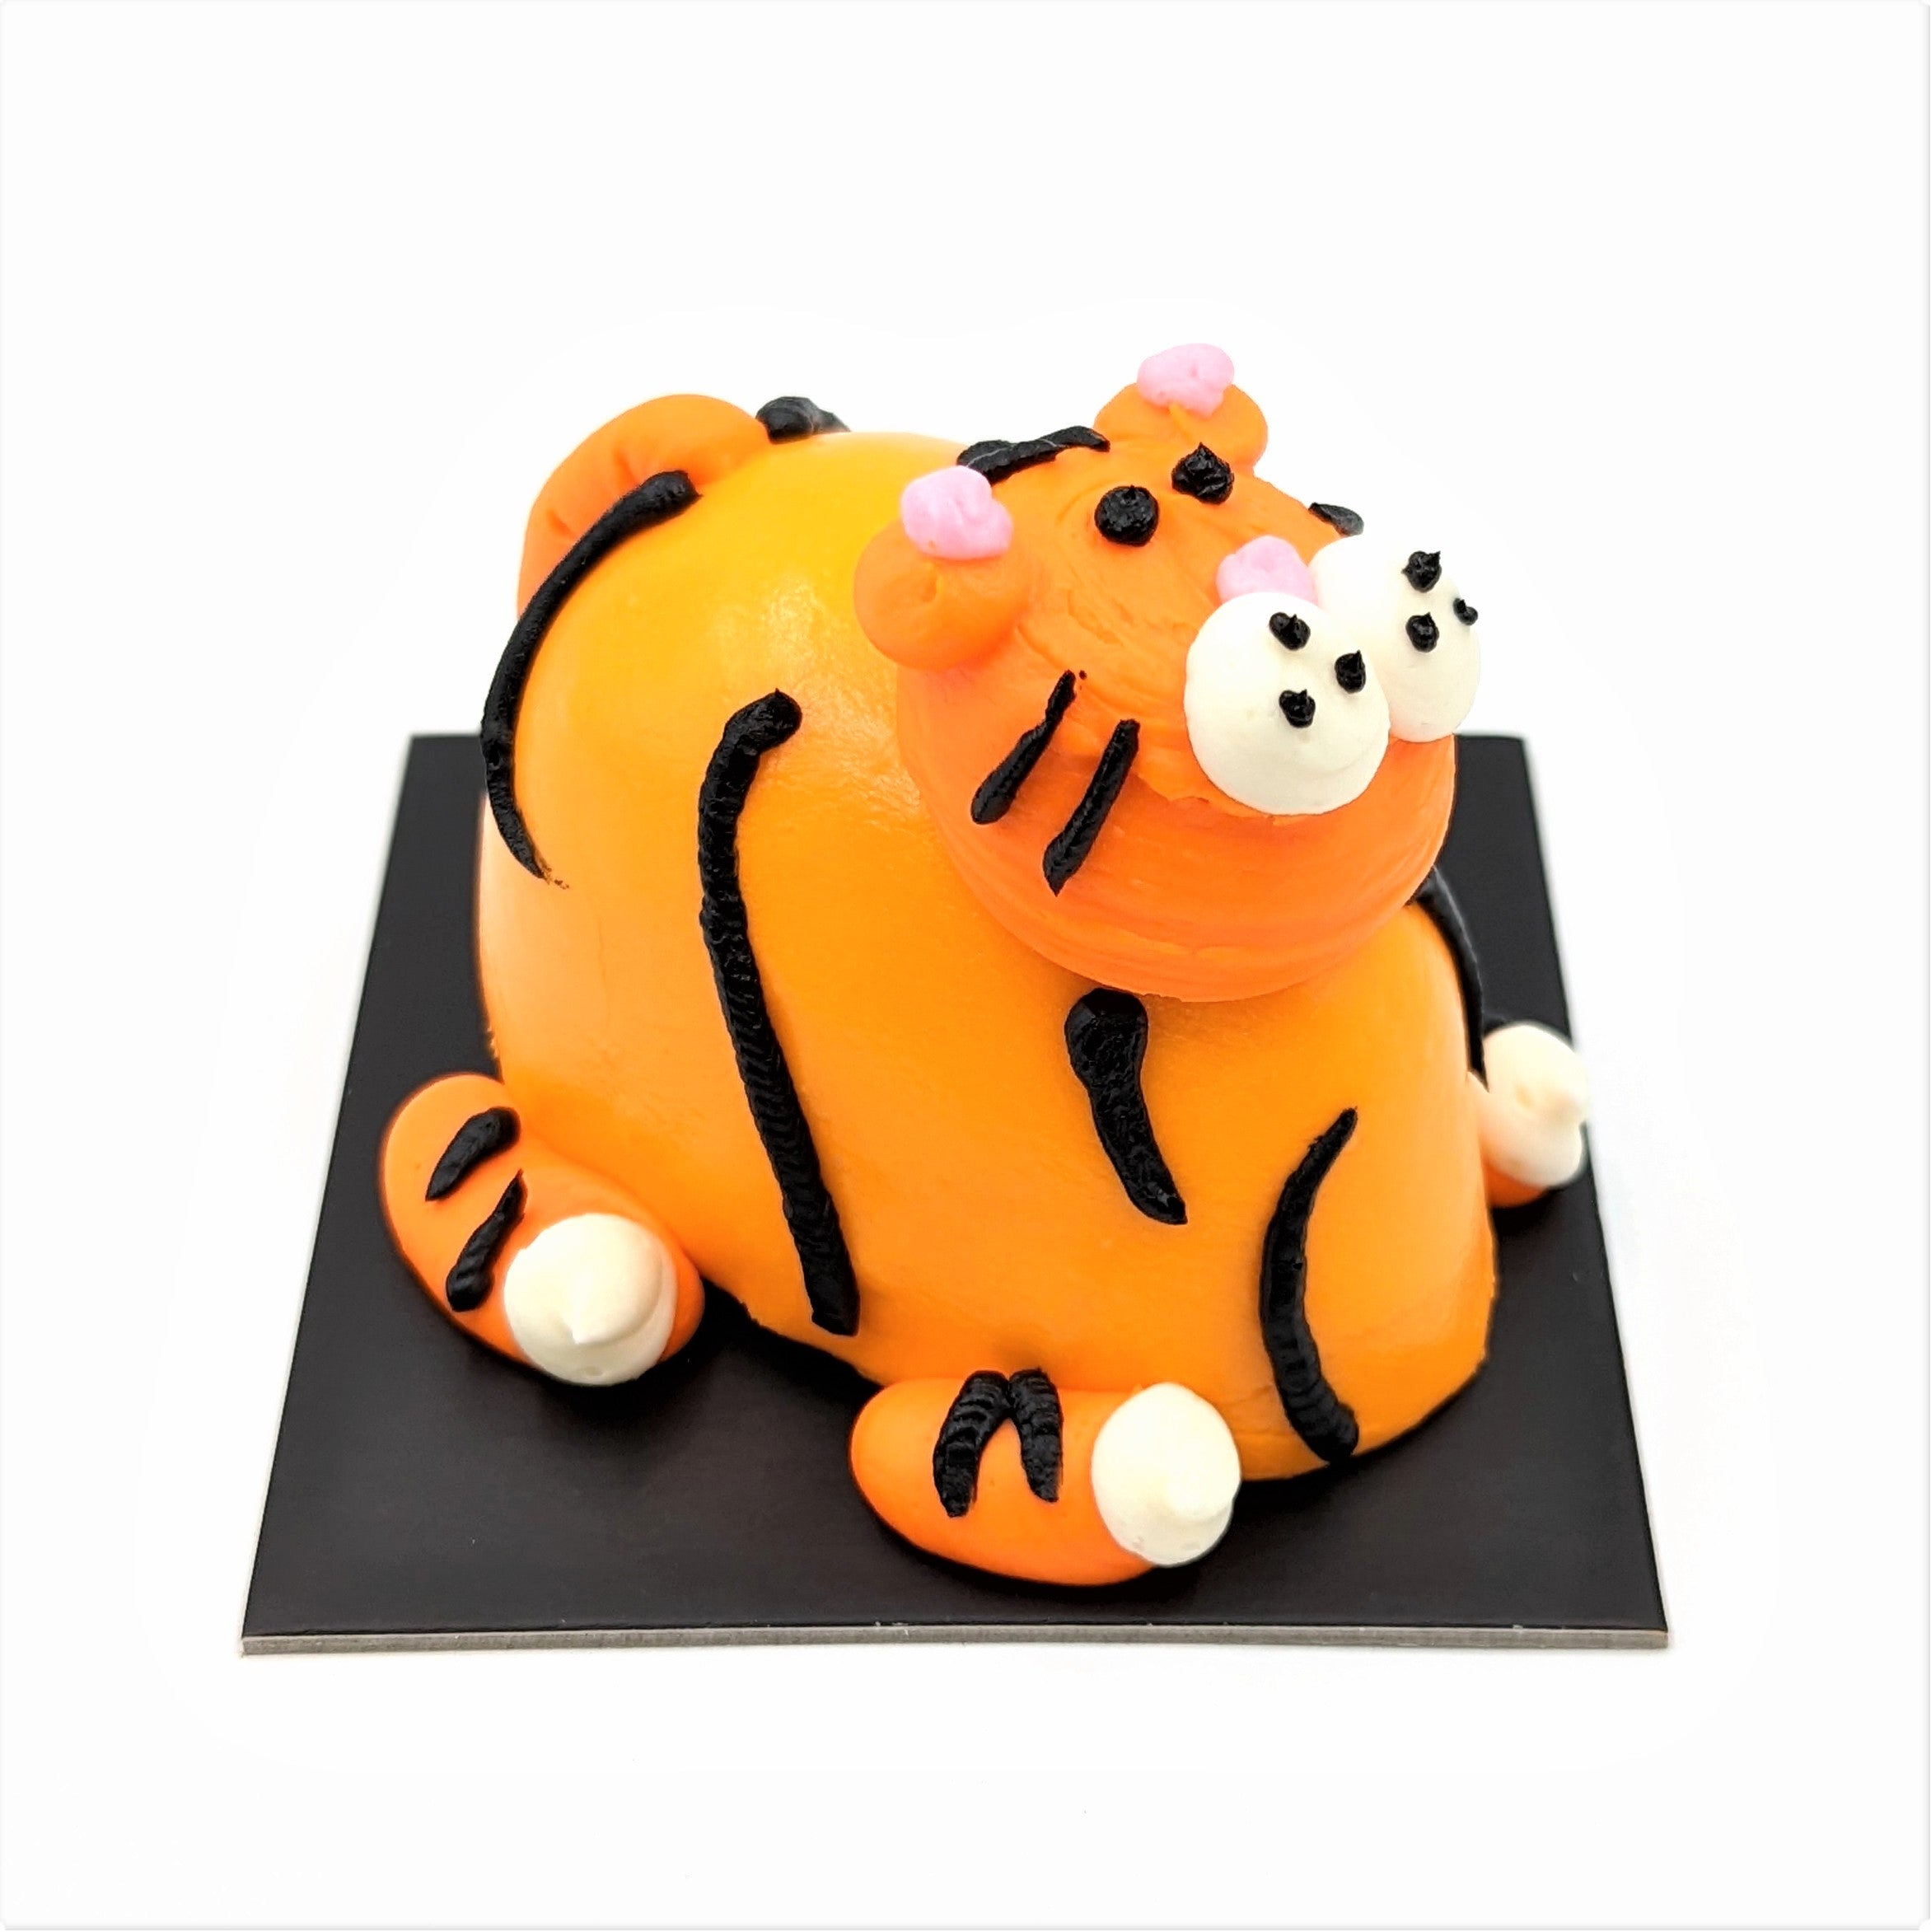 Tiger Face Cake – This Little Cakery